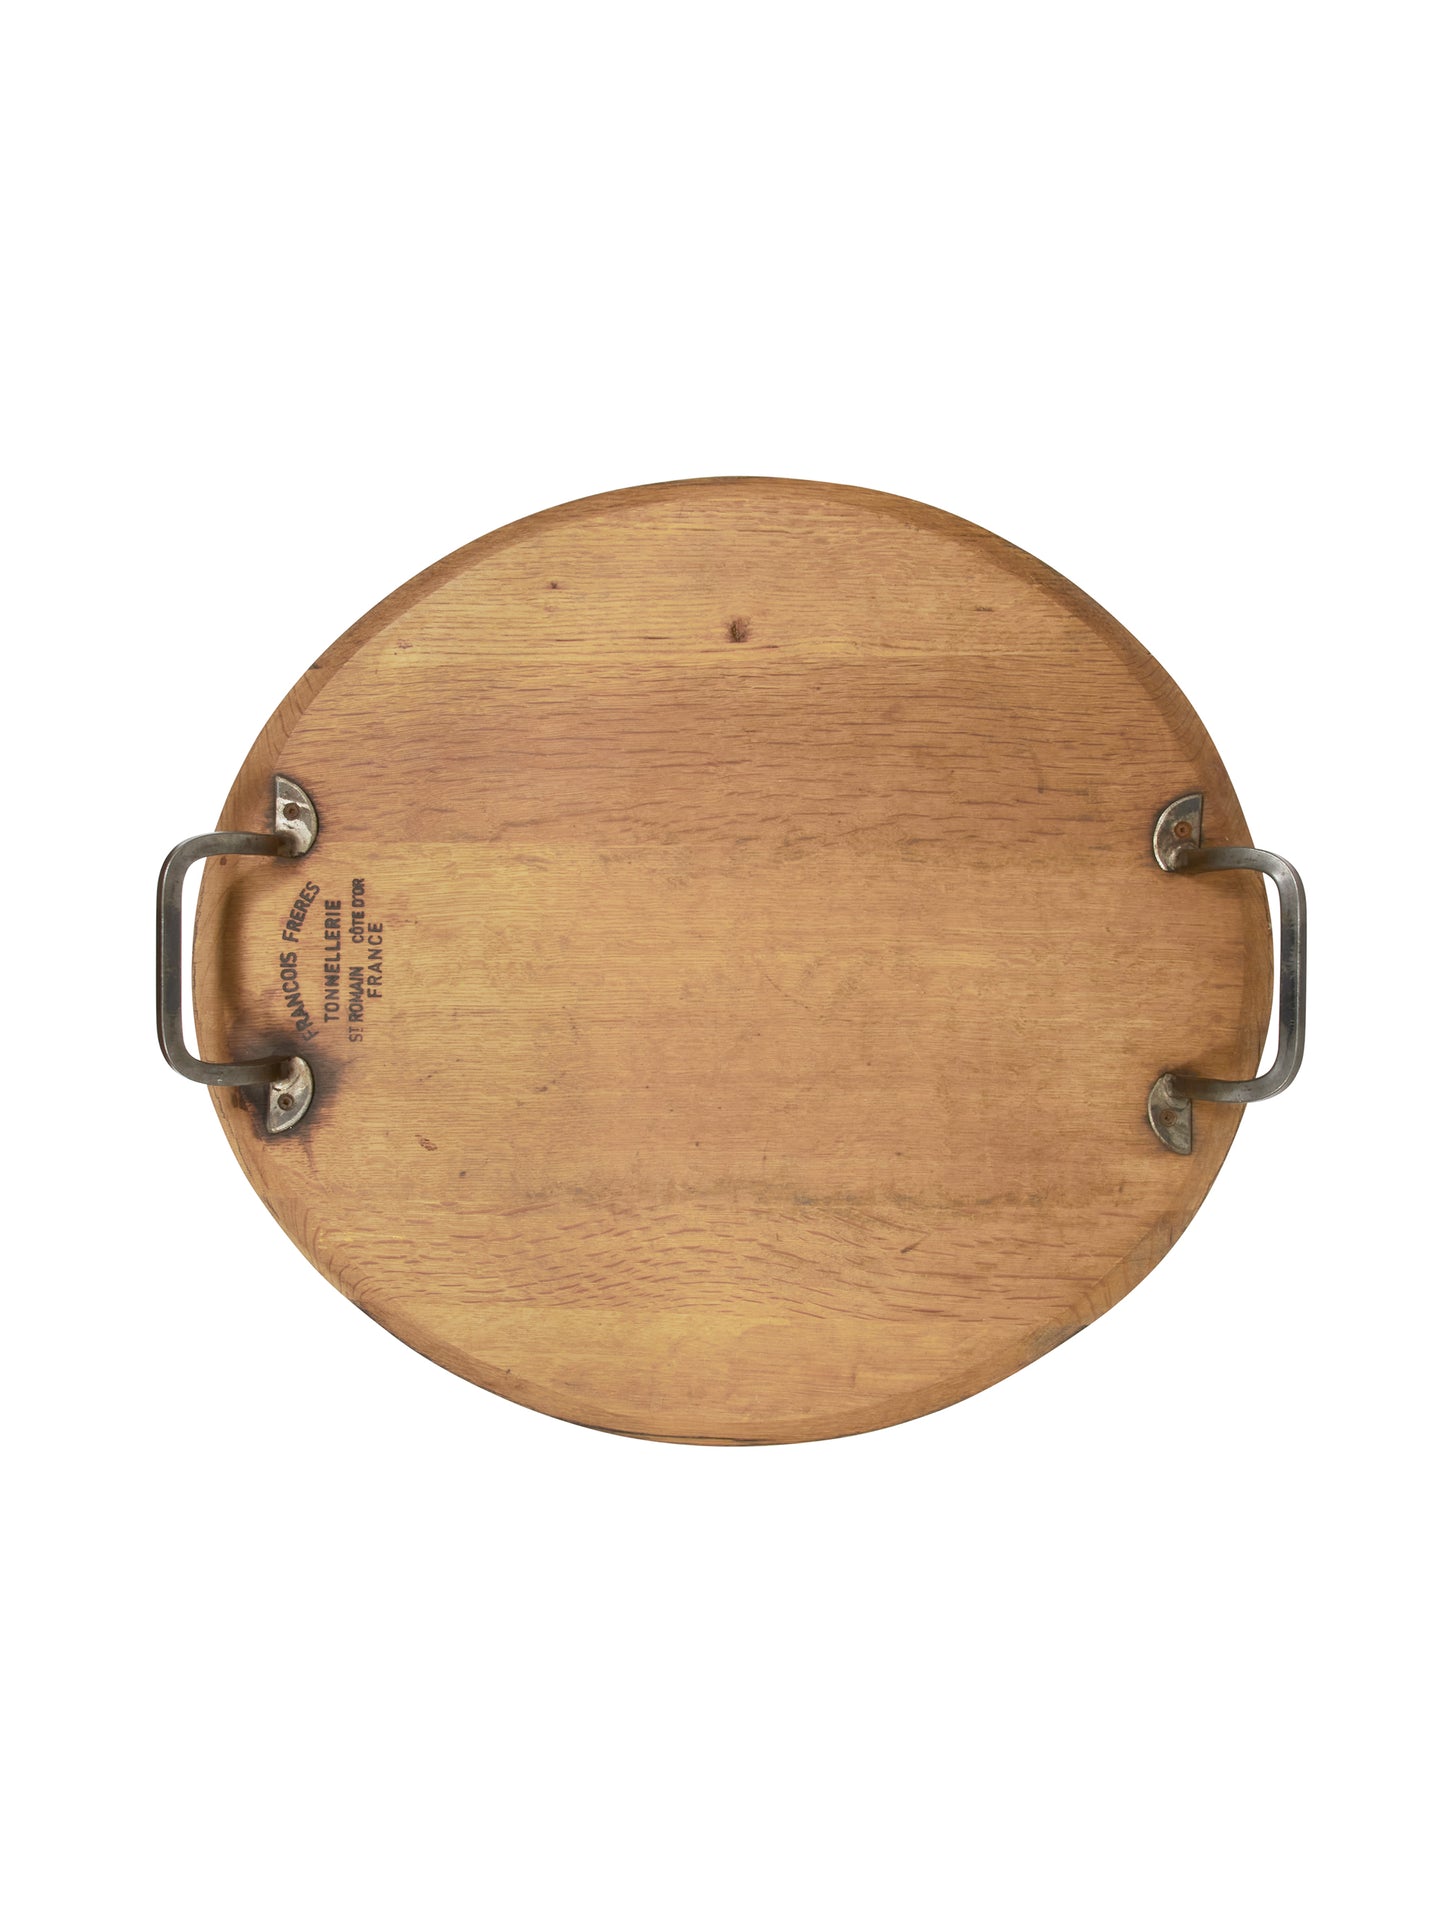 Francois Freres Wine Barrel Board with Wrought Iron Handles Weston Table